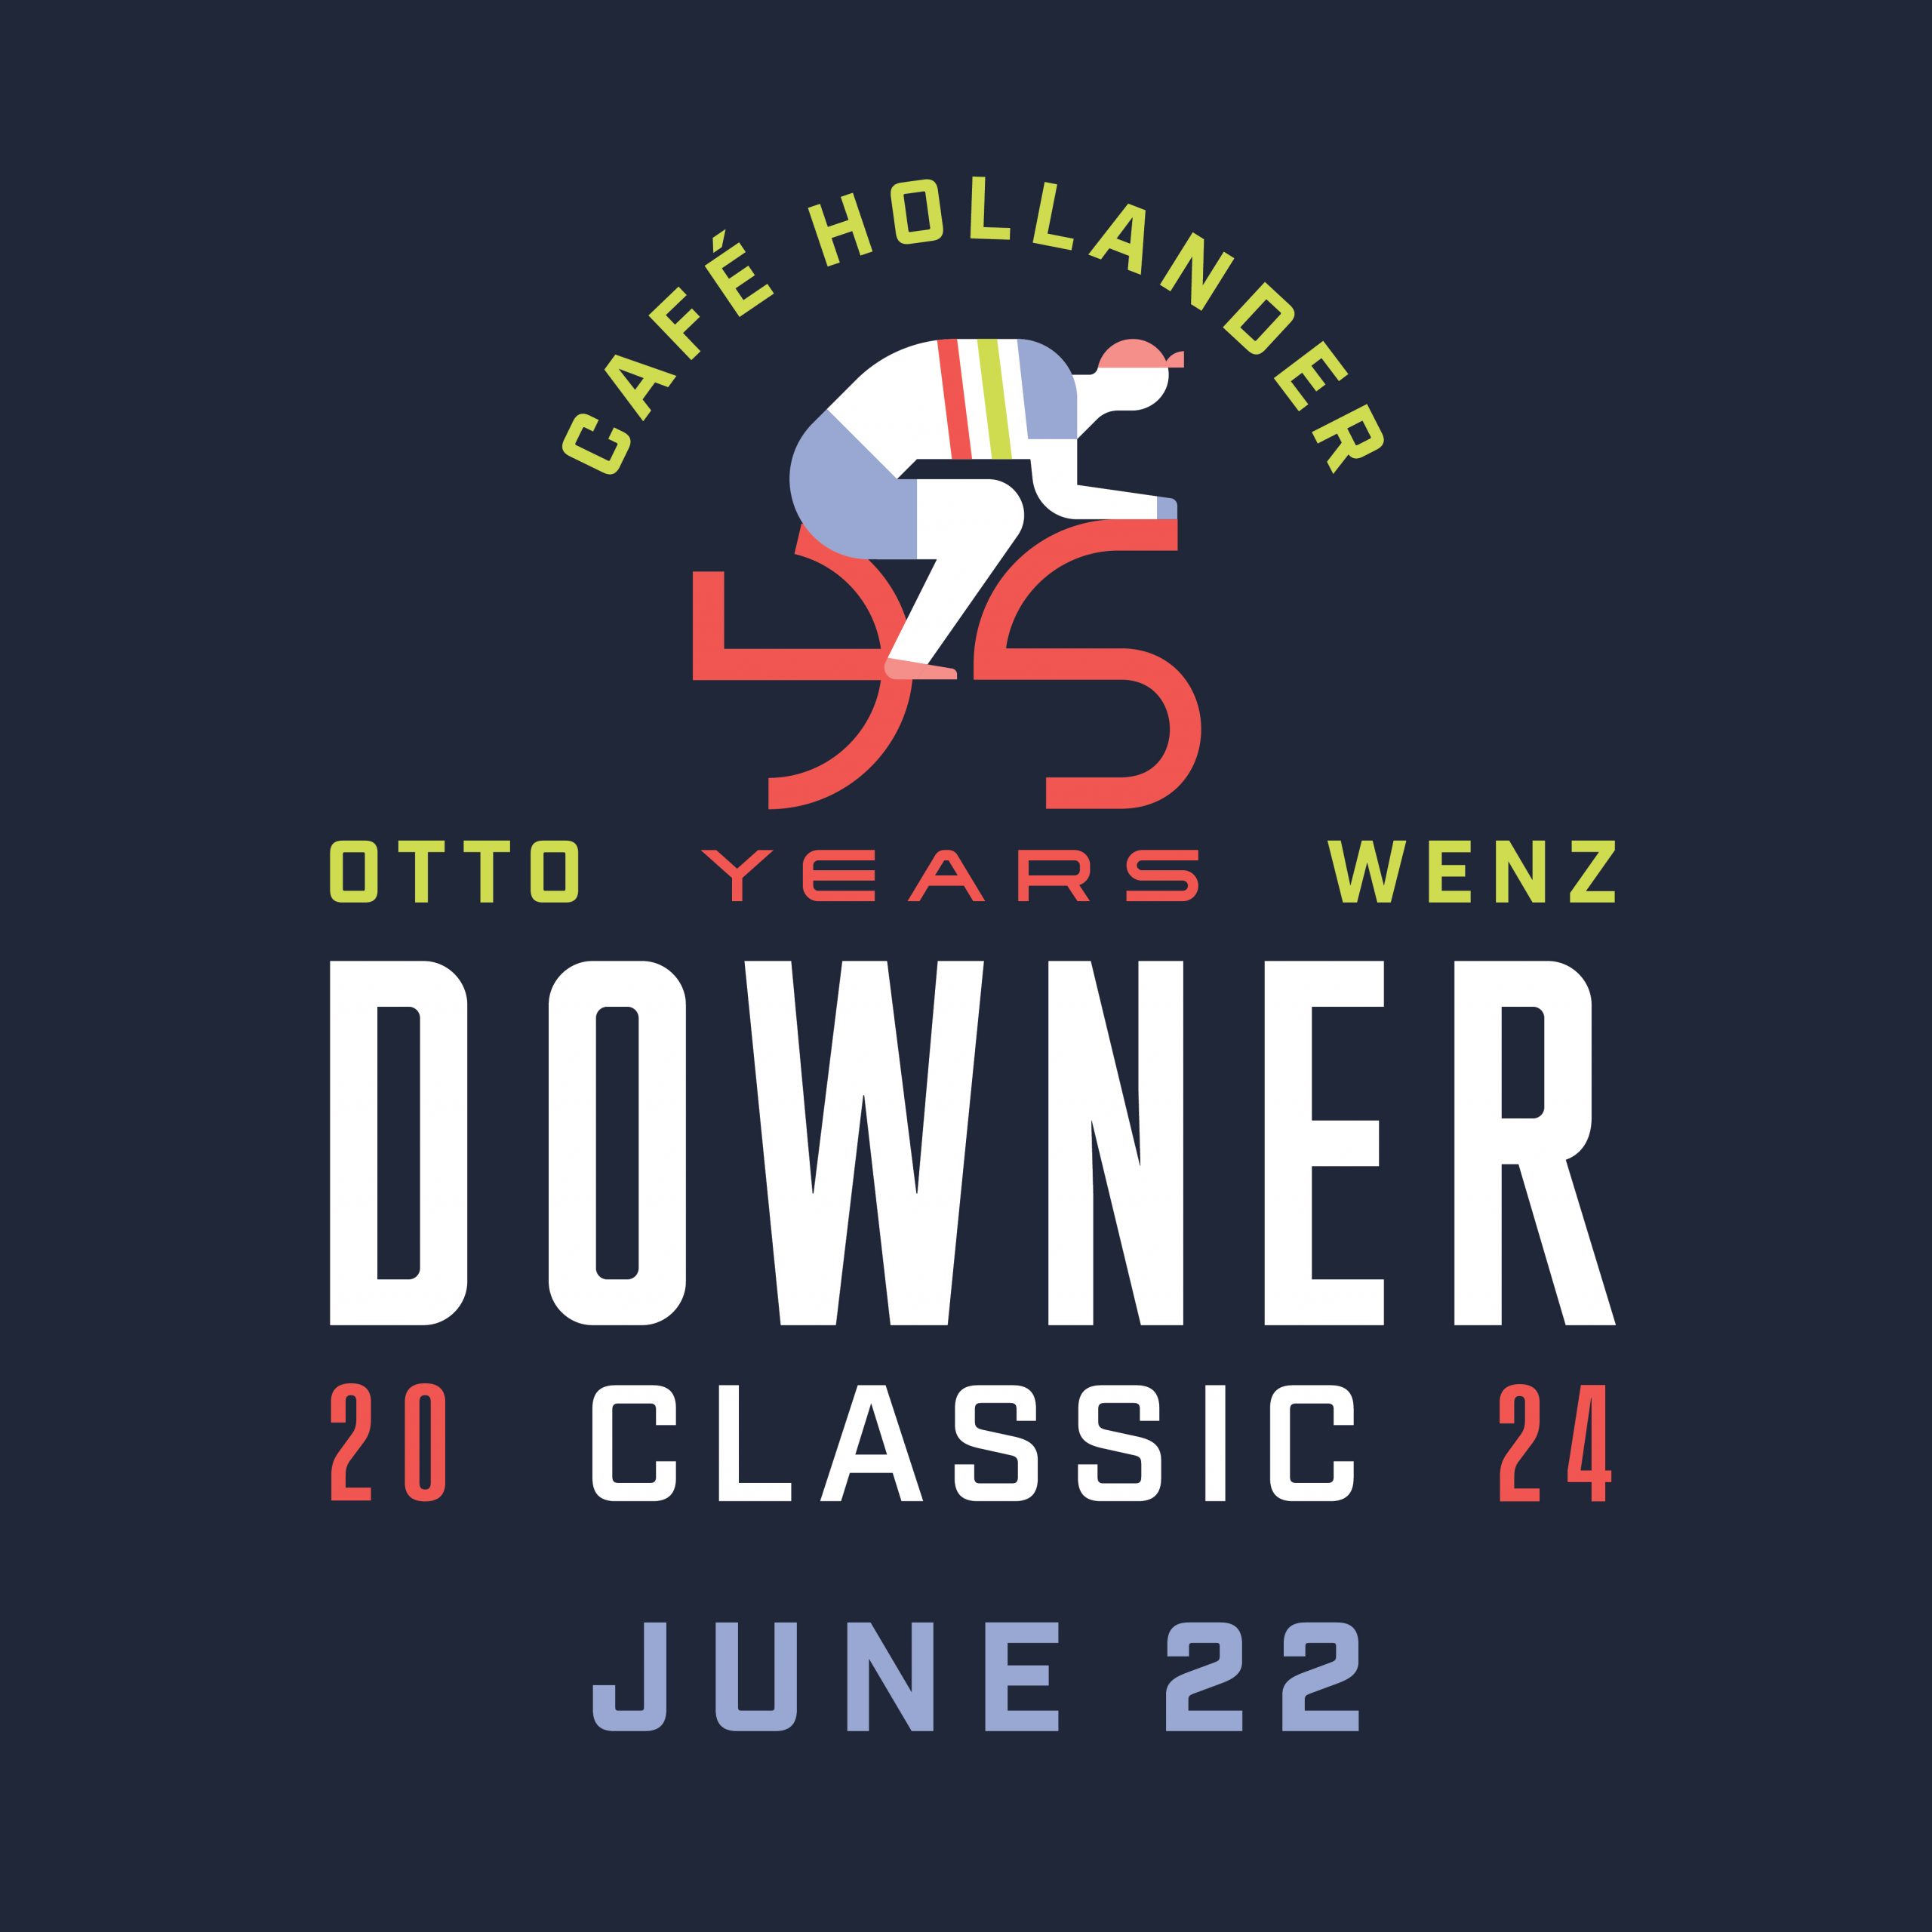 45 Years of the Cafe Hollander Otto Wenz Downer Classic